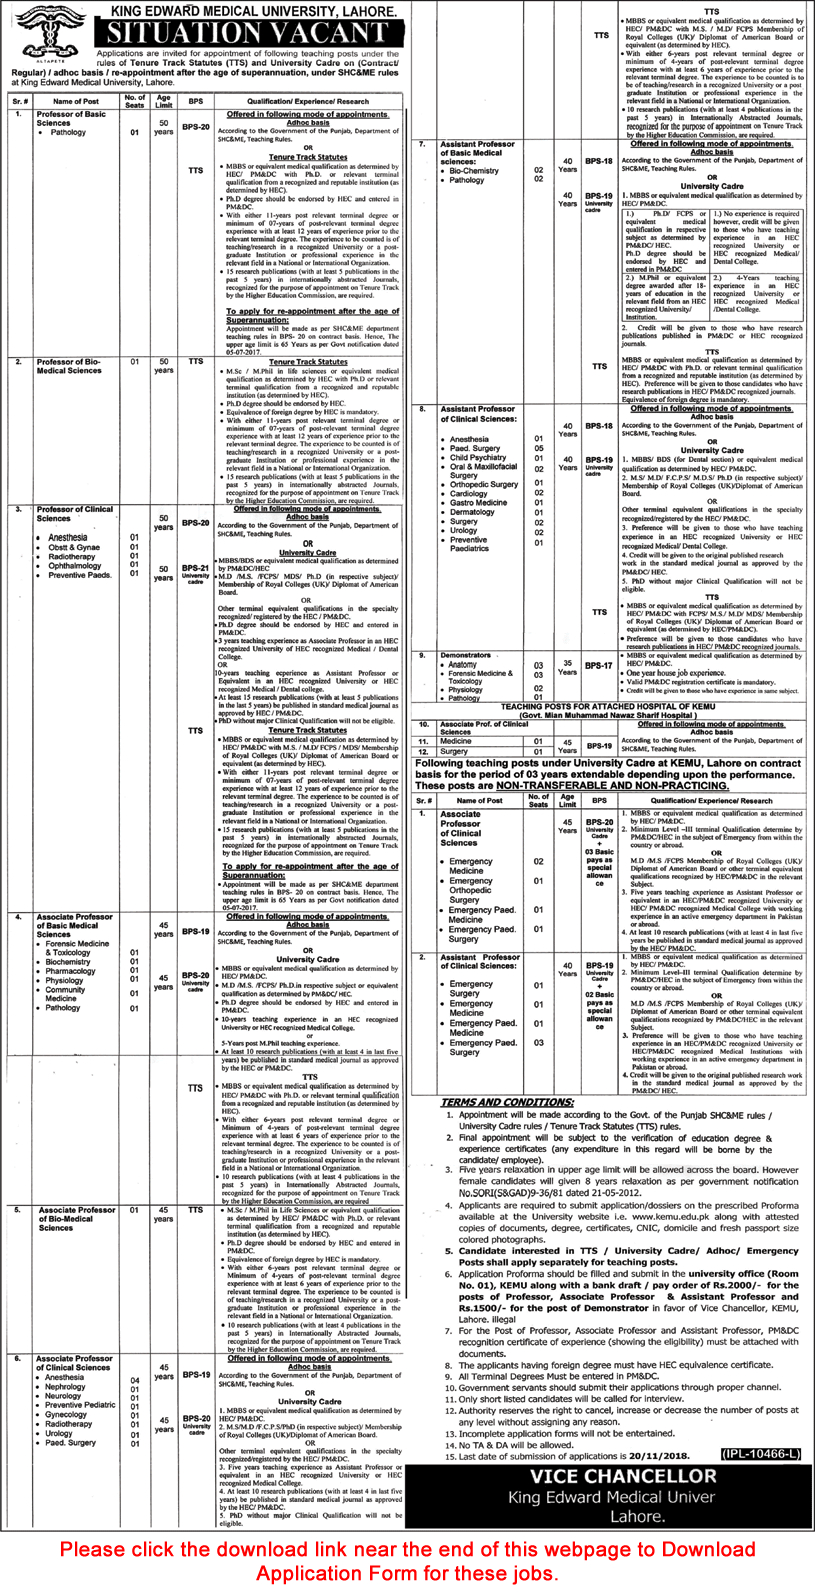 King Edward Medical University Lahore Jobs October 2018 November Application Form Teaching Faculty & Others Latest